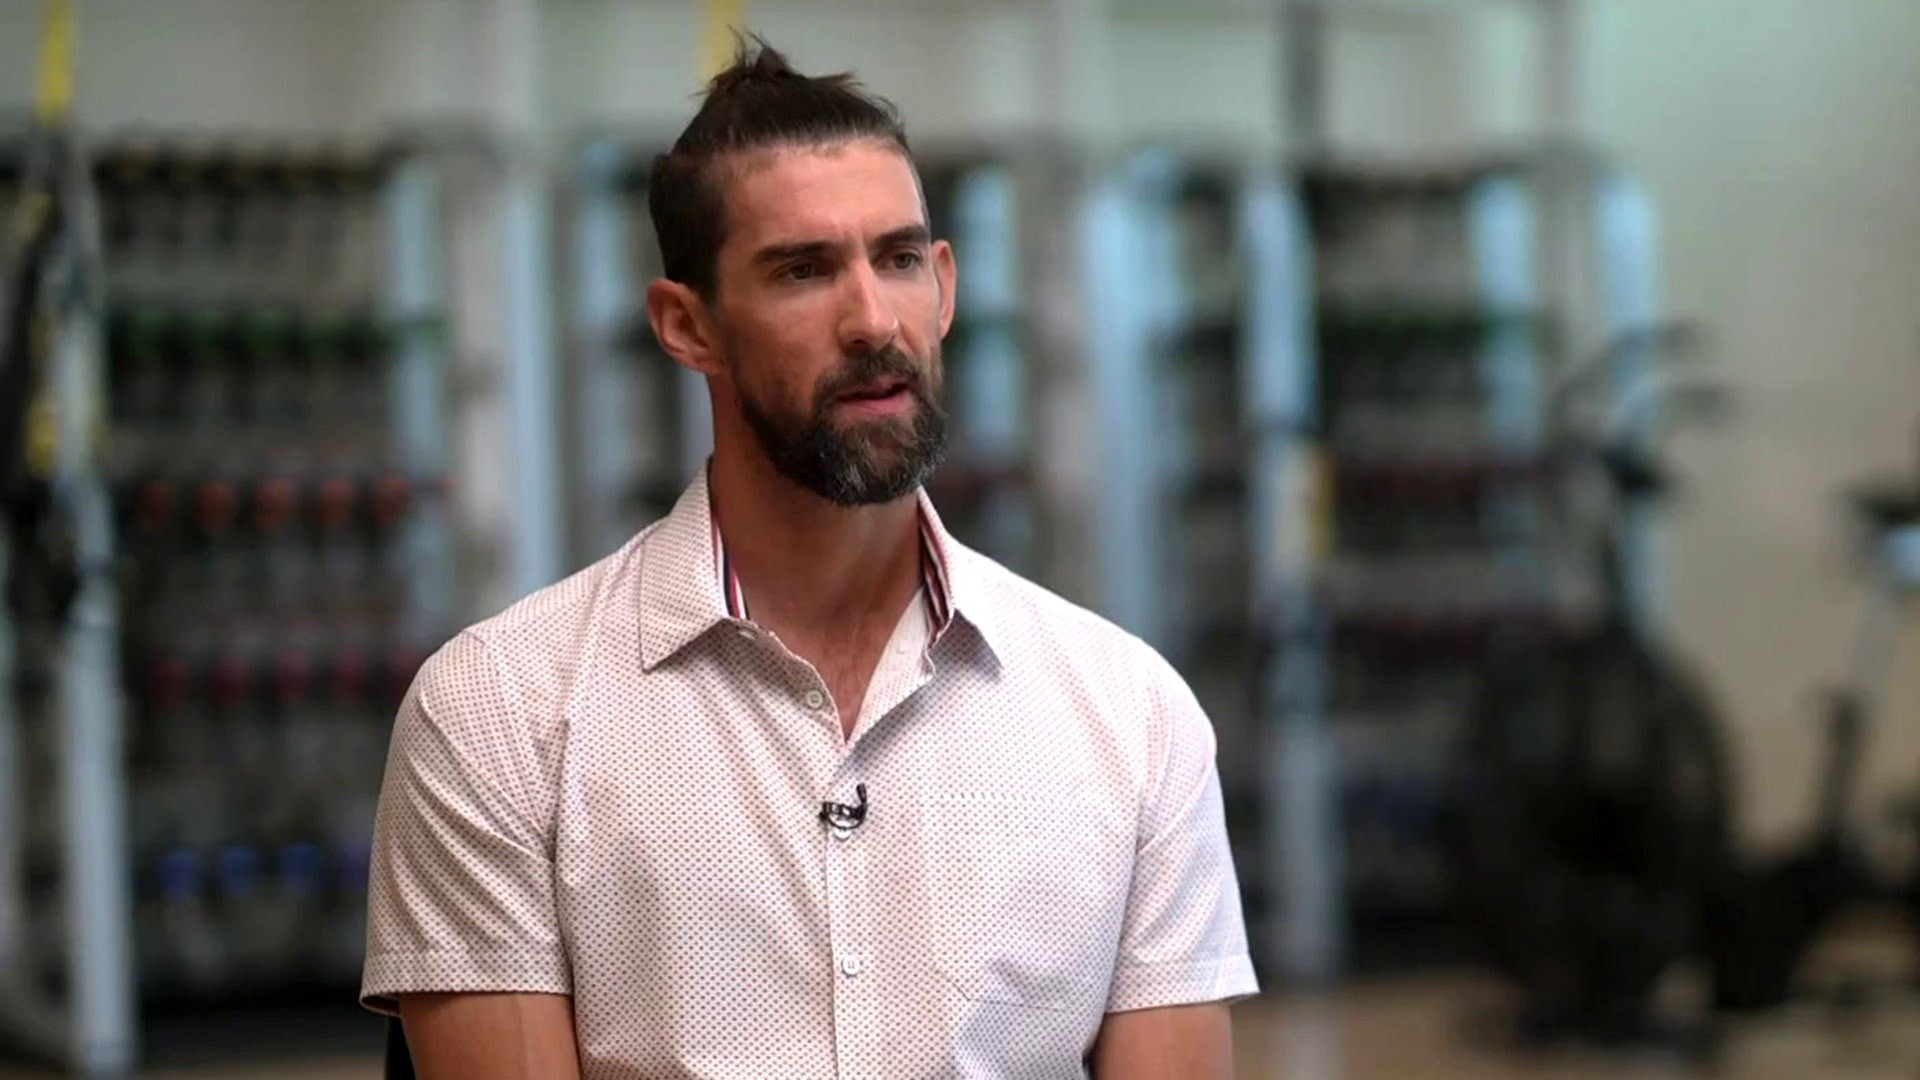 Michael Phelps opens up about mental health to Kristen Welker